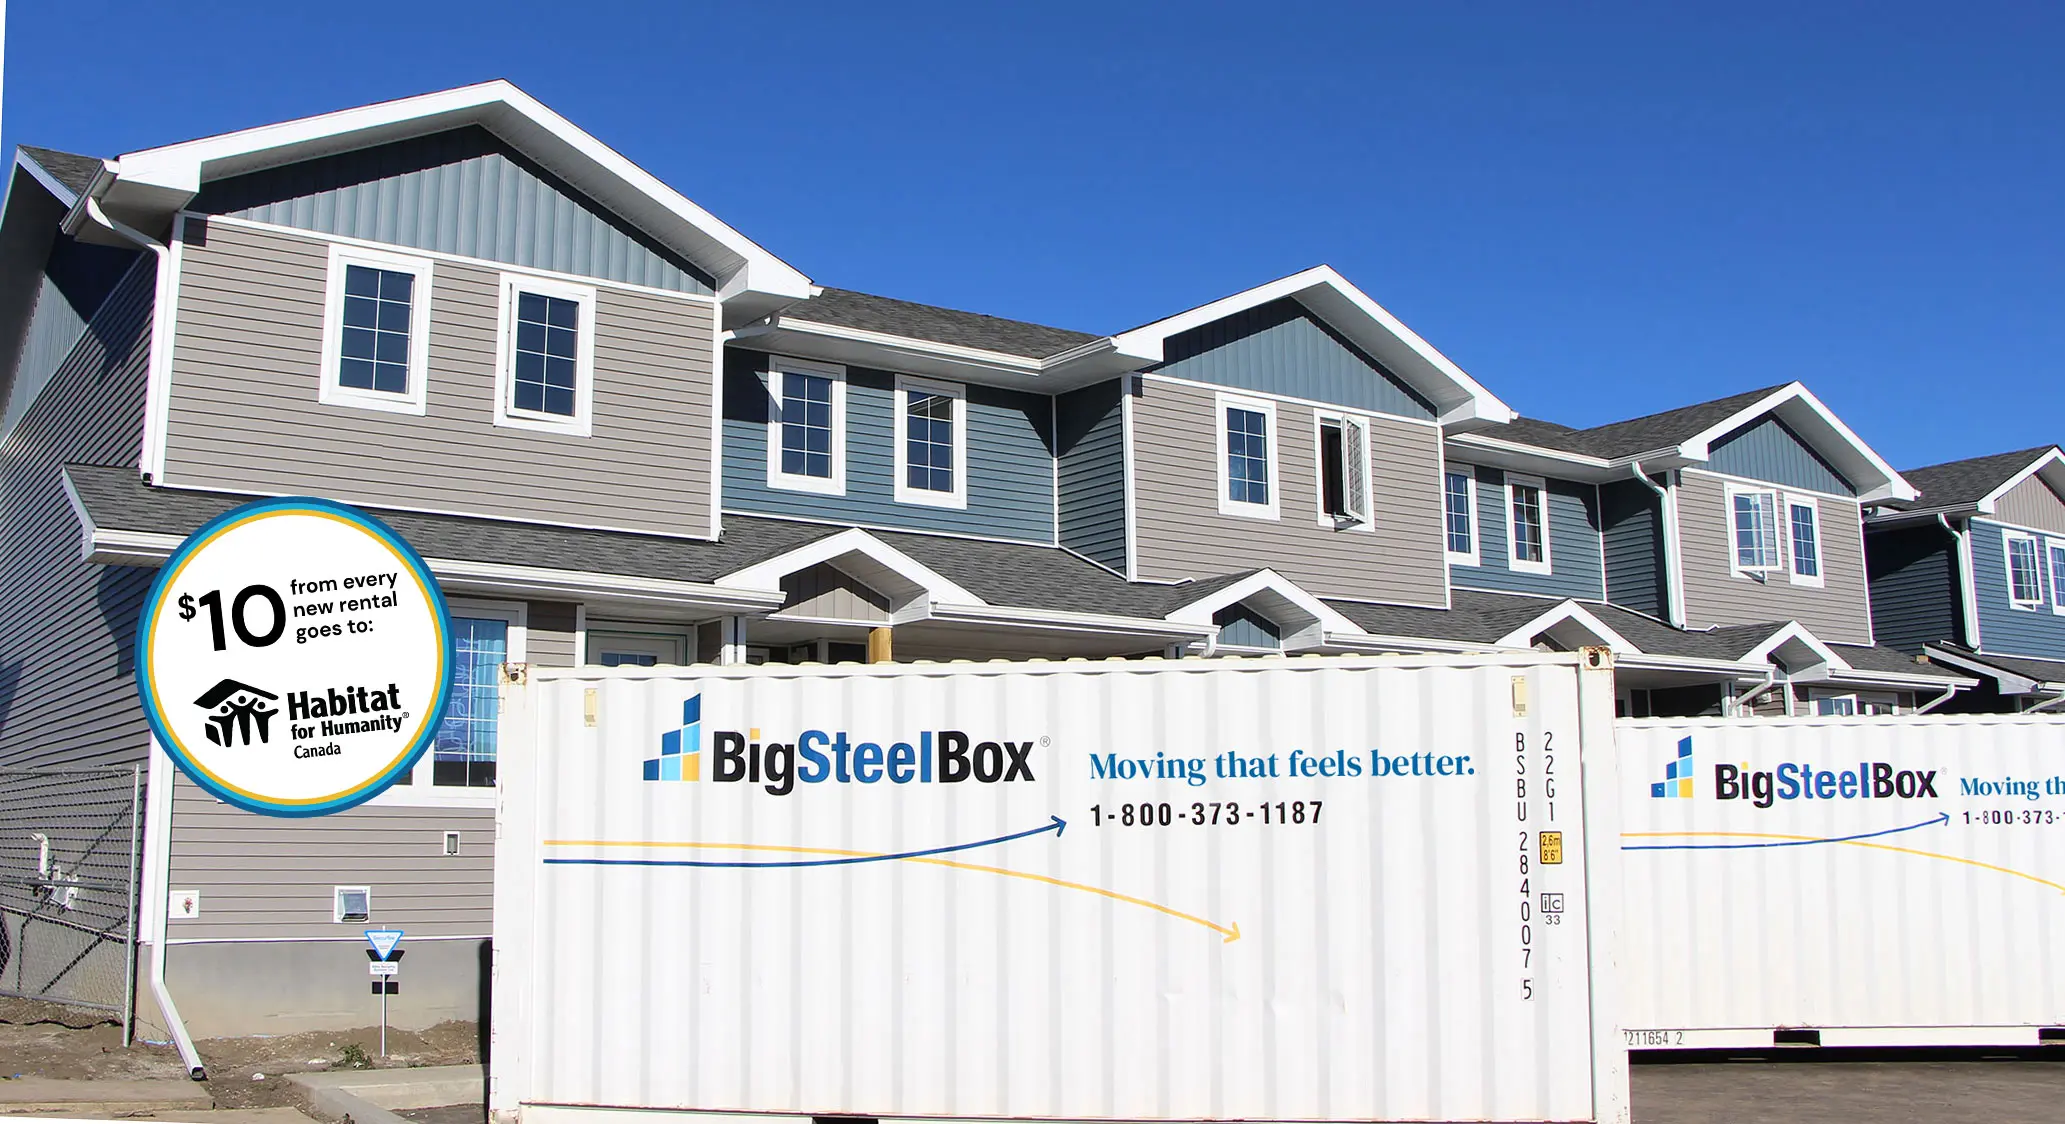 From May 1 - July 31, 2022, BigSteelBox is donating $10 from every new container rental to Habitat for Humanity Canada